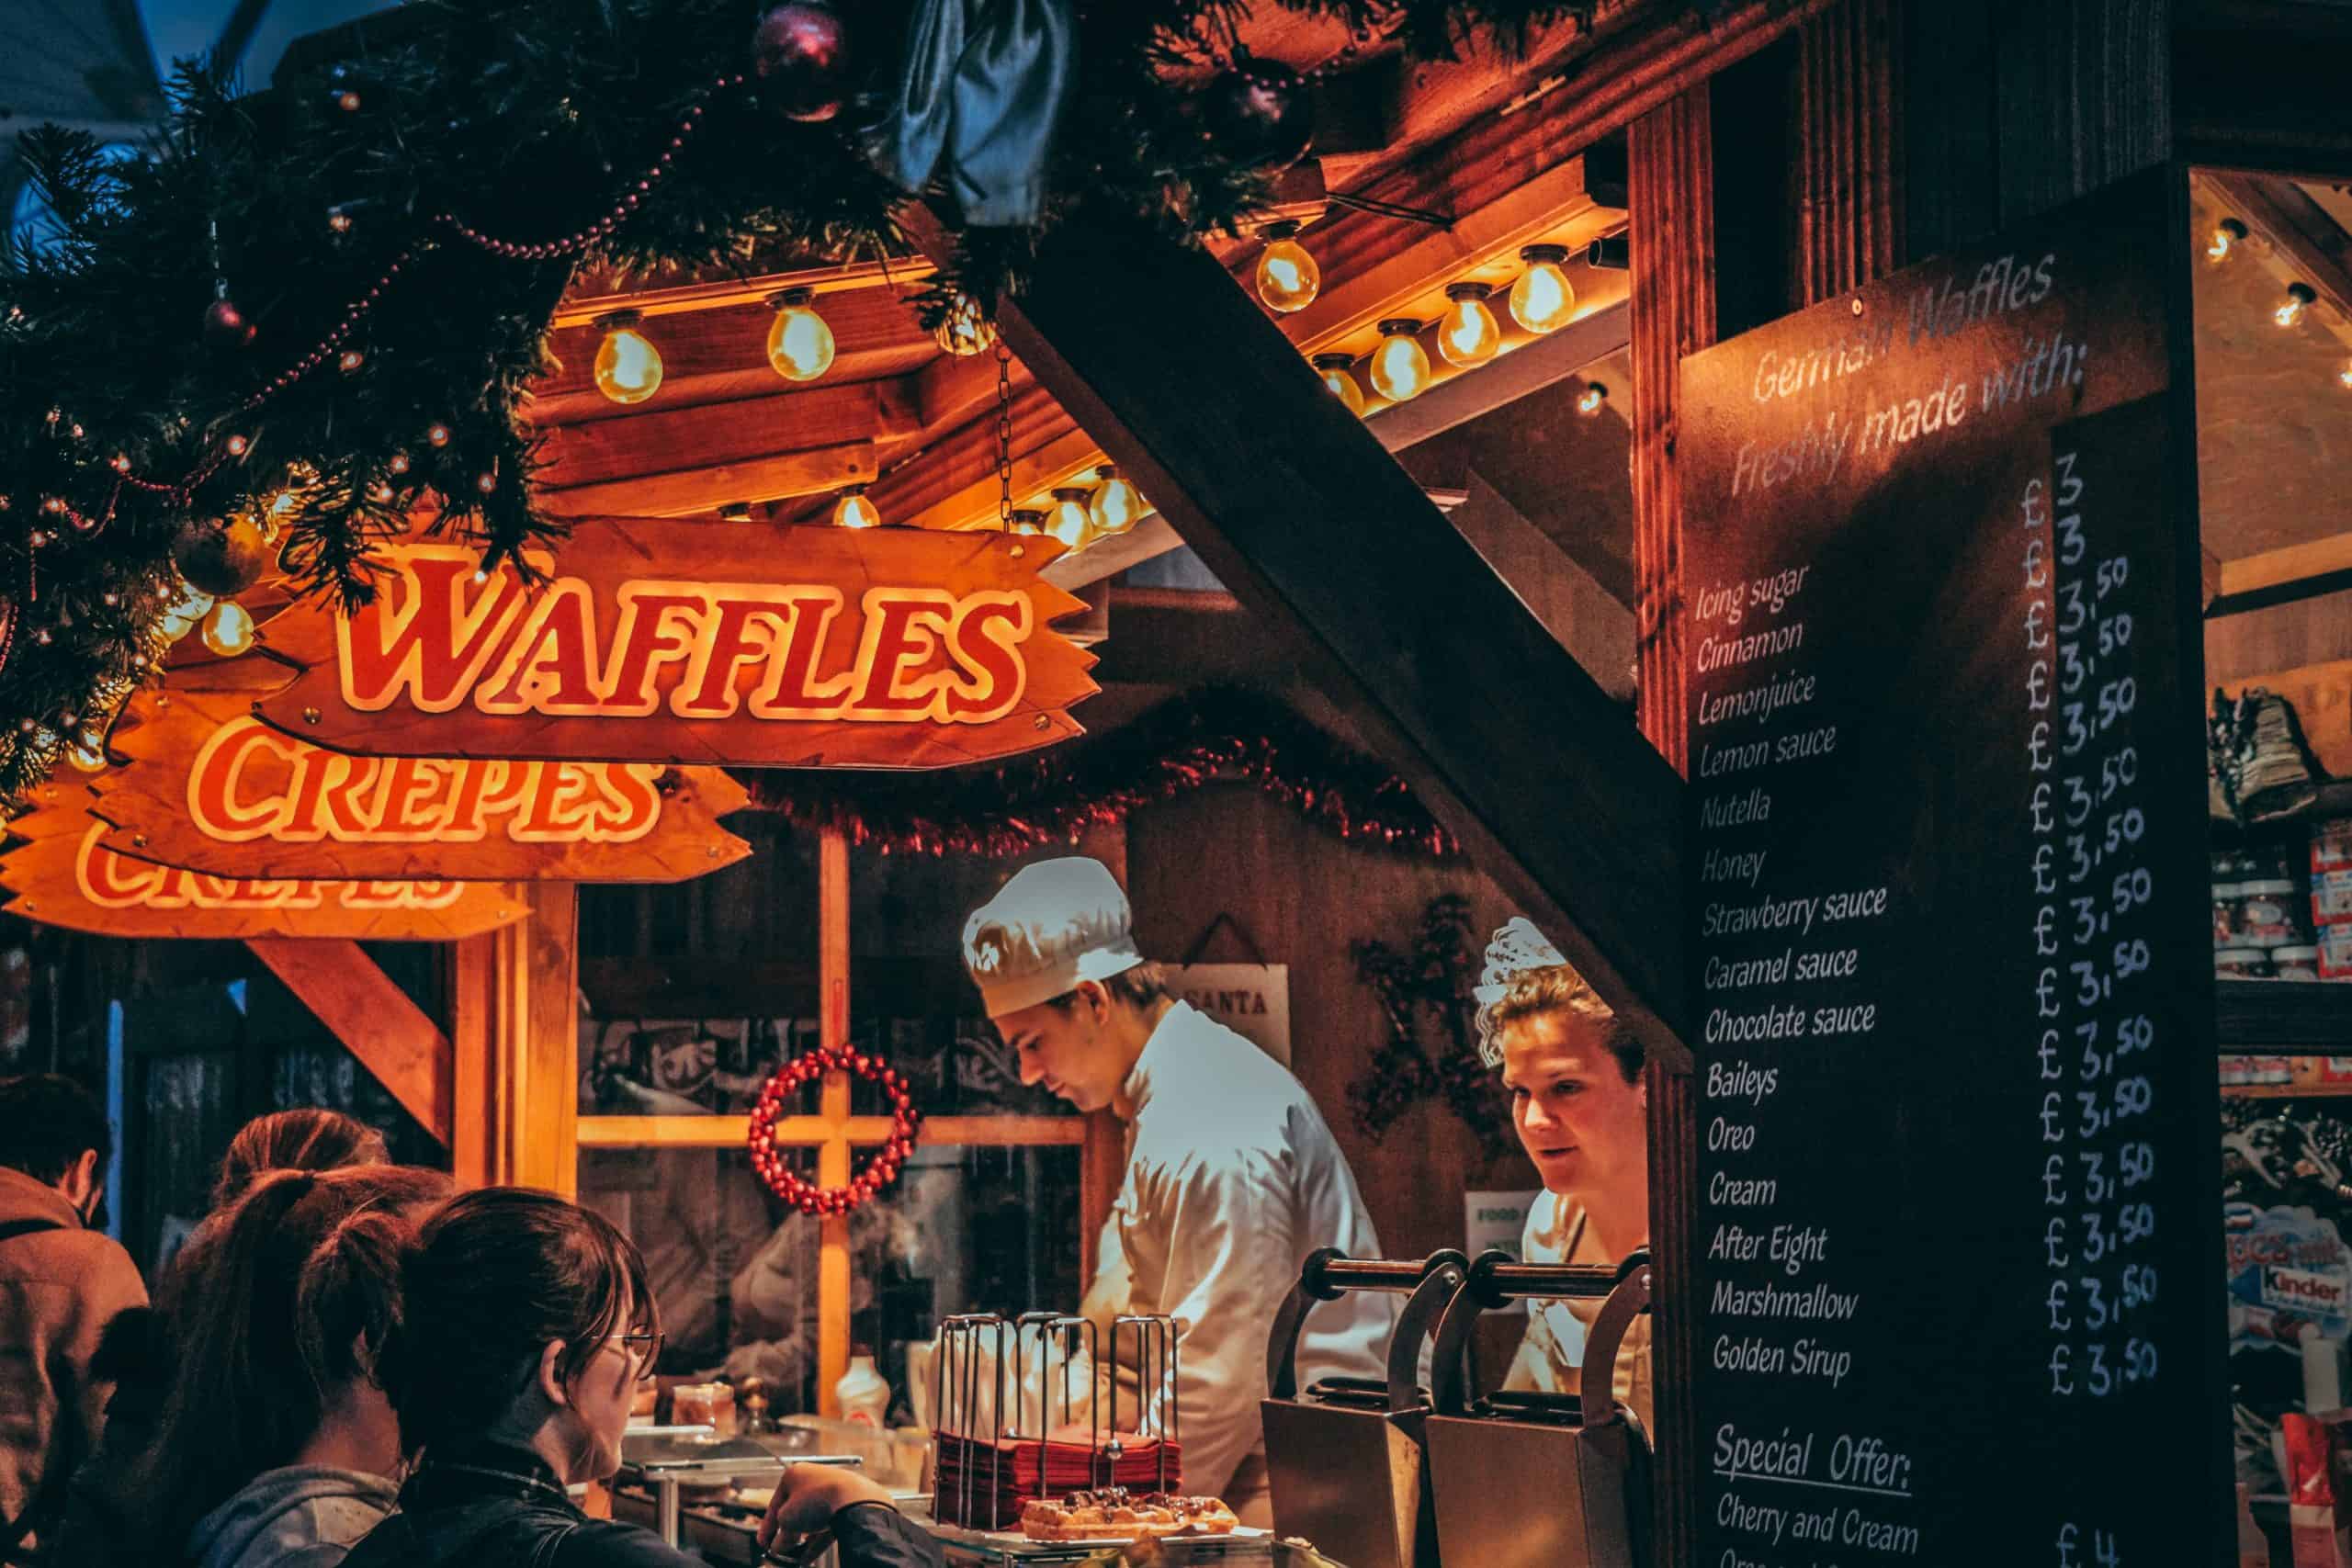 Waffle stall in a German Christmas Market